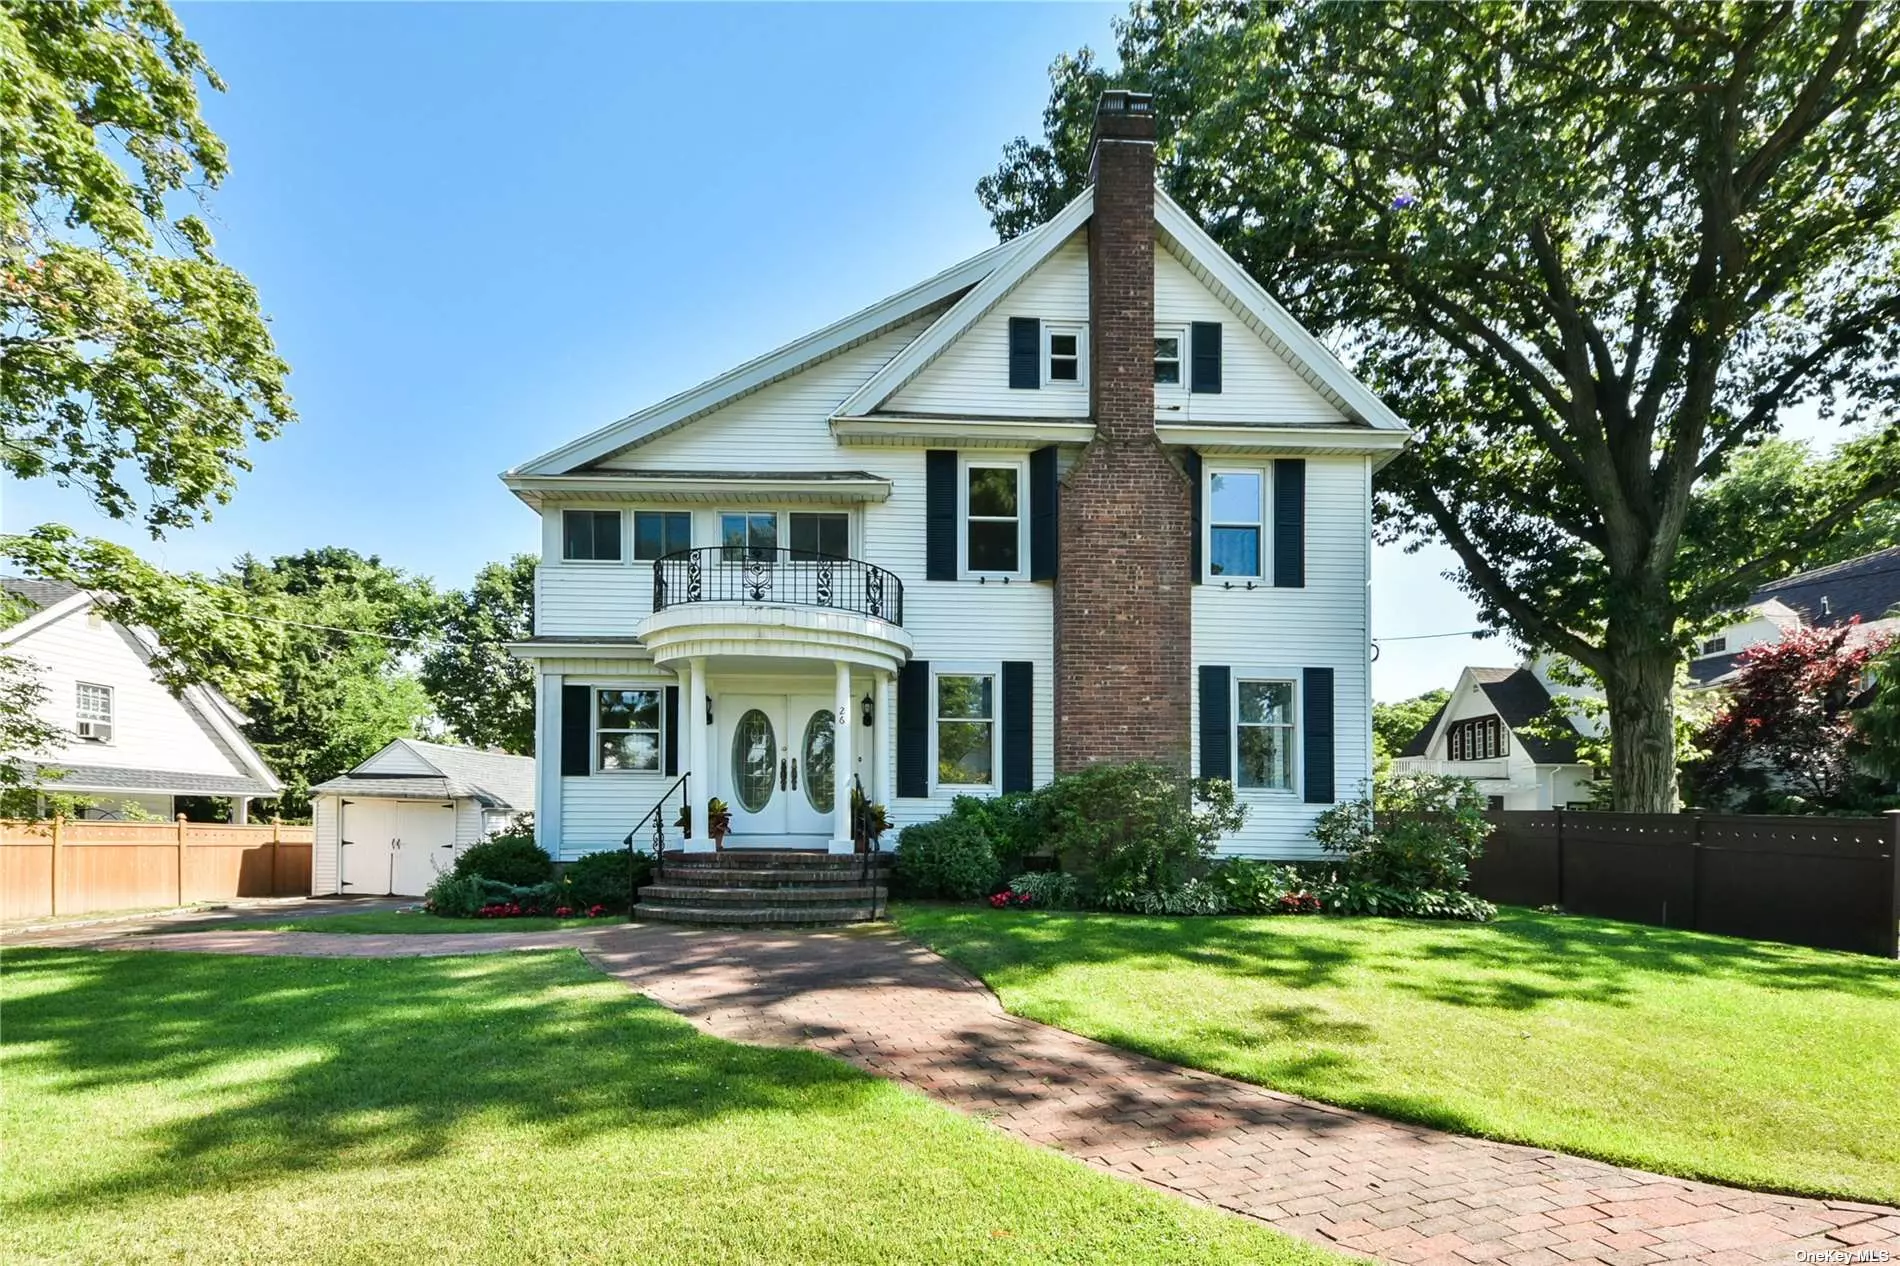 Classic Center Hall Colonial completely renovated. Extra large lot with private fenced back yard and huge deck. Front yard professionally landscaped. Close to marina and waterfront. Close to transportation and school. 25 minutes LIRR commute to Manhattan.